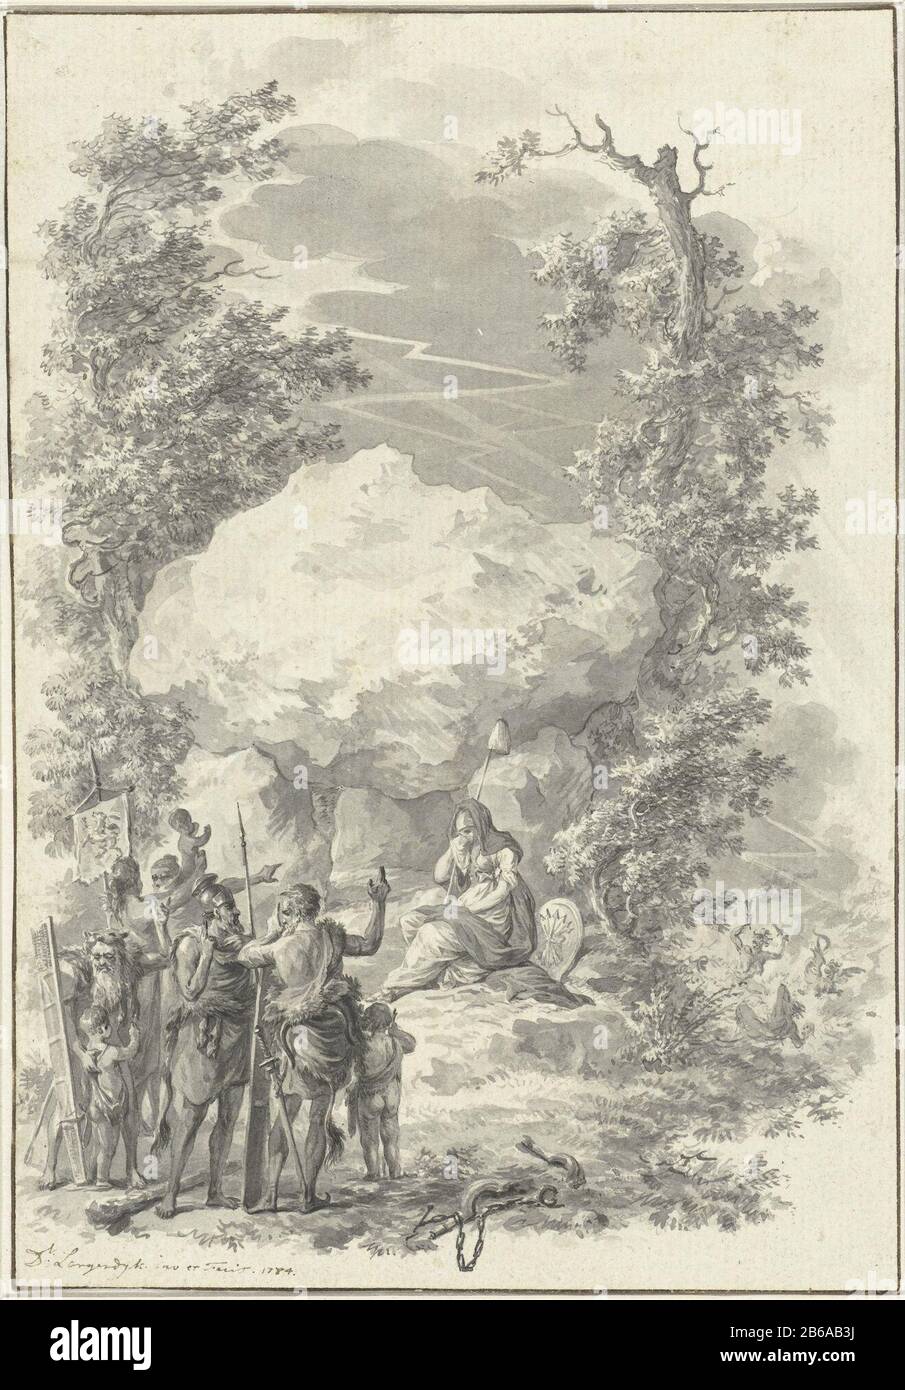 Allegory of the death of Joan Derk van der Capellen tot den Pol, 1784 Allegory on the death of Joan Derk van der Capellen to den Pol, June 6, 1784. a group Batavians points to a verse on the deceased at the capstone of a dolmen. Among the rock sits the grie Virgin Dutch. From the clouds lightning. Draft prent. Manufacturer : artist: Dirk Langendijk (personally signed) Place manufacture: Northern Netherlands Date: 1784 Physical features: pen and brush in gray material: paper ink technology: pen / brush dimensions: H 204 mm × W 141 mm Subject: extinct, 'historical 'peoples (with NAME) megalithic Stock Photo